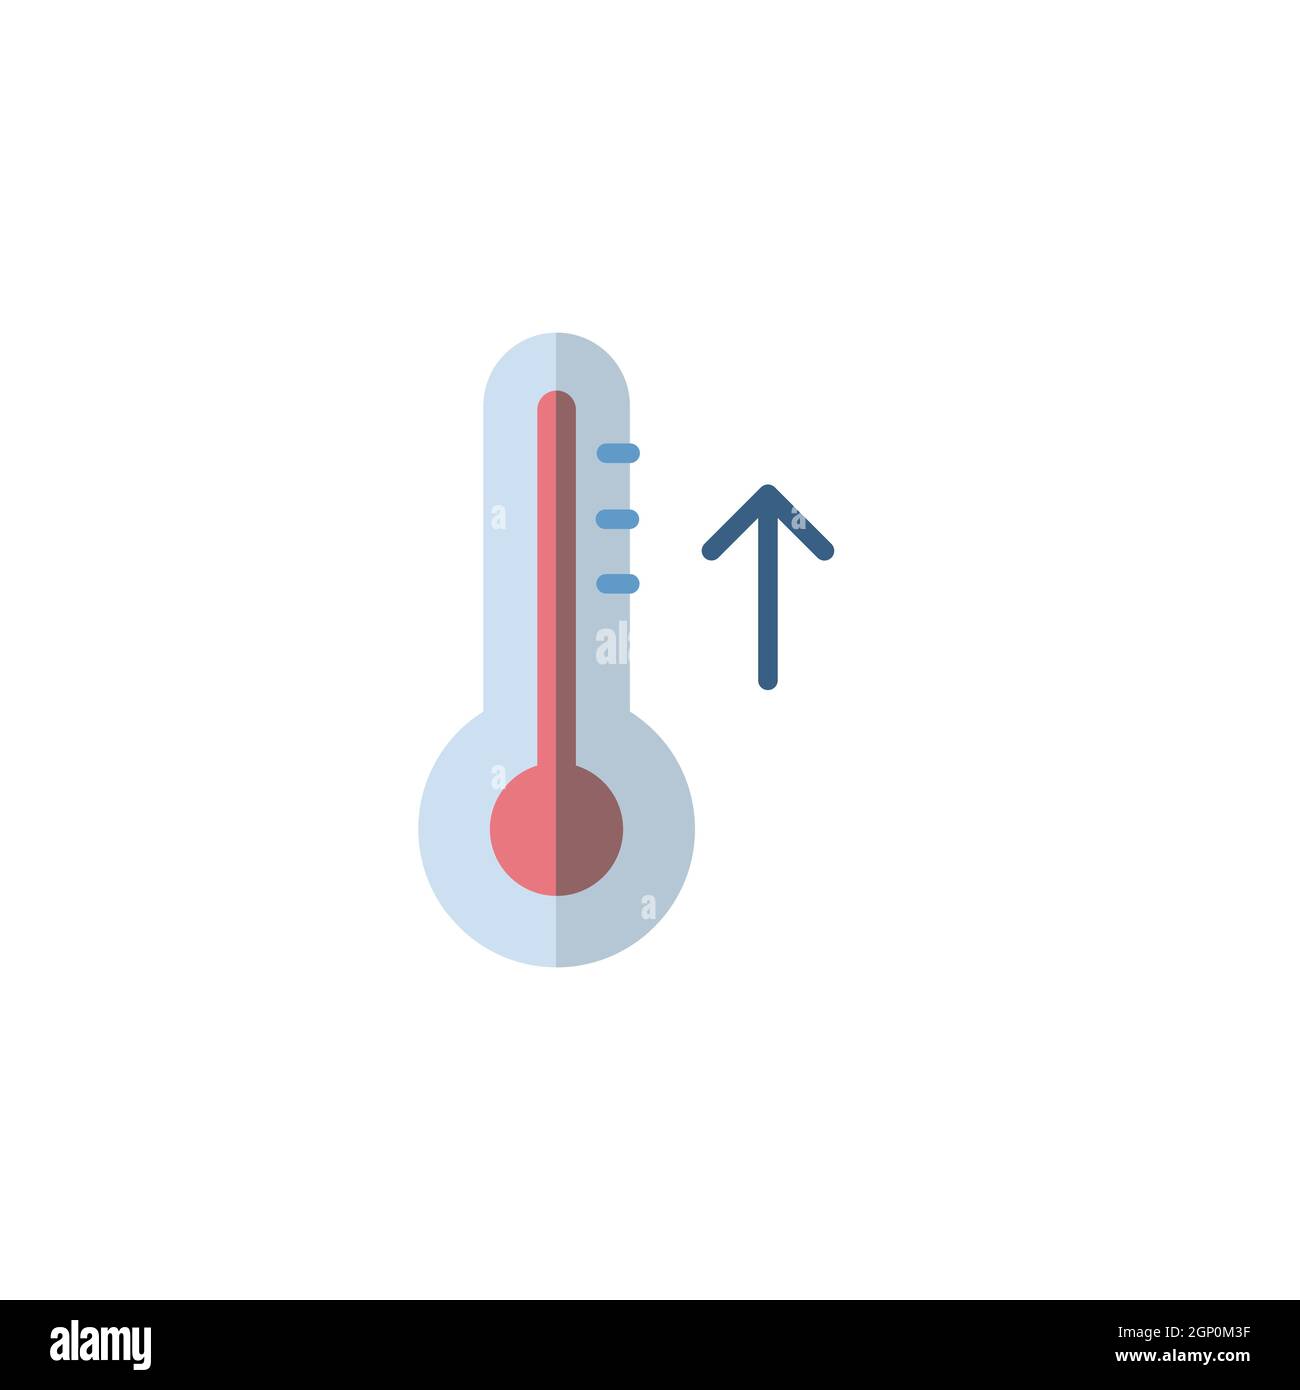 https://c8.alamy.com/comp/2GP0M3F/thermometer-rise-temperature-flat-icon-isolated-weather-vector-illustration-2GP0M3F.jpg